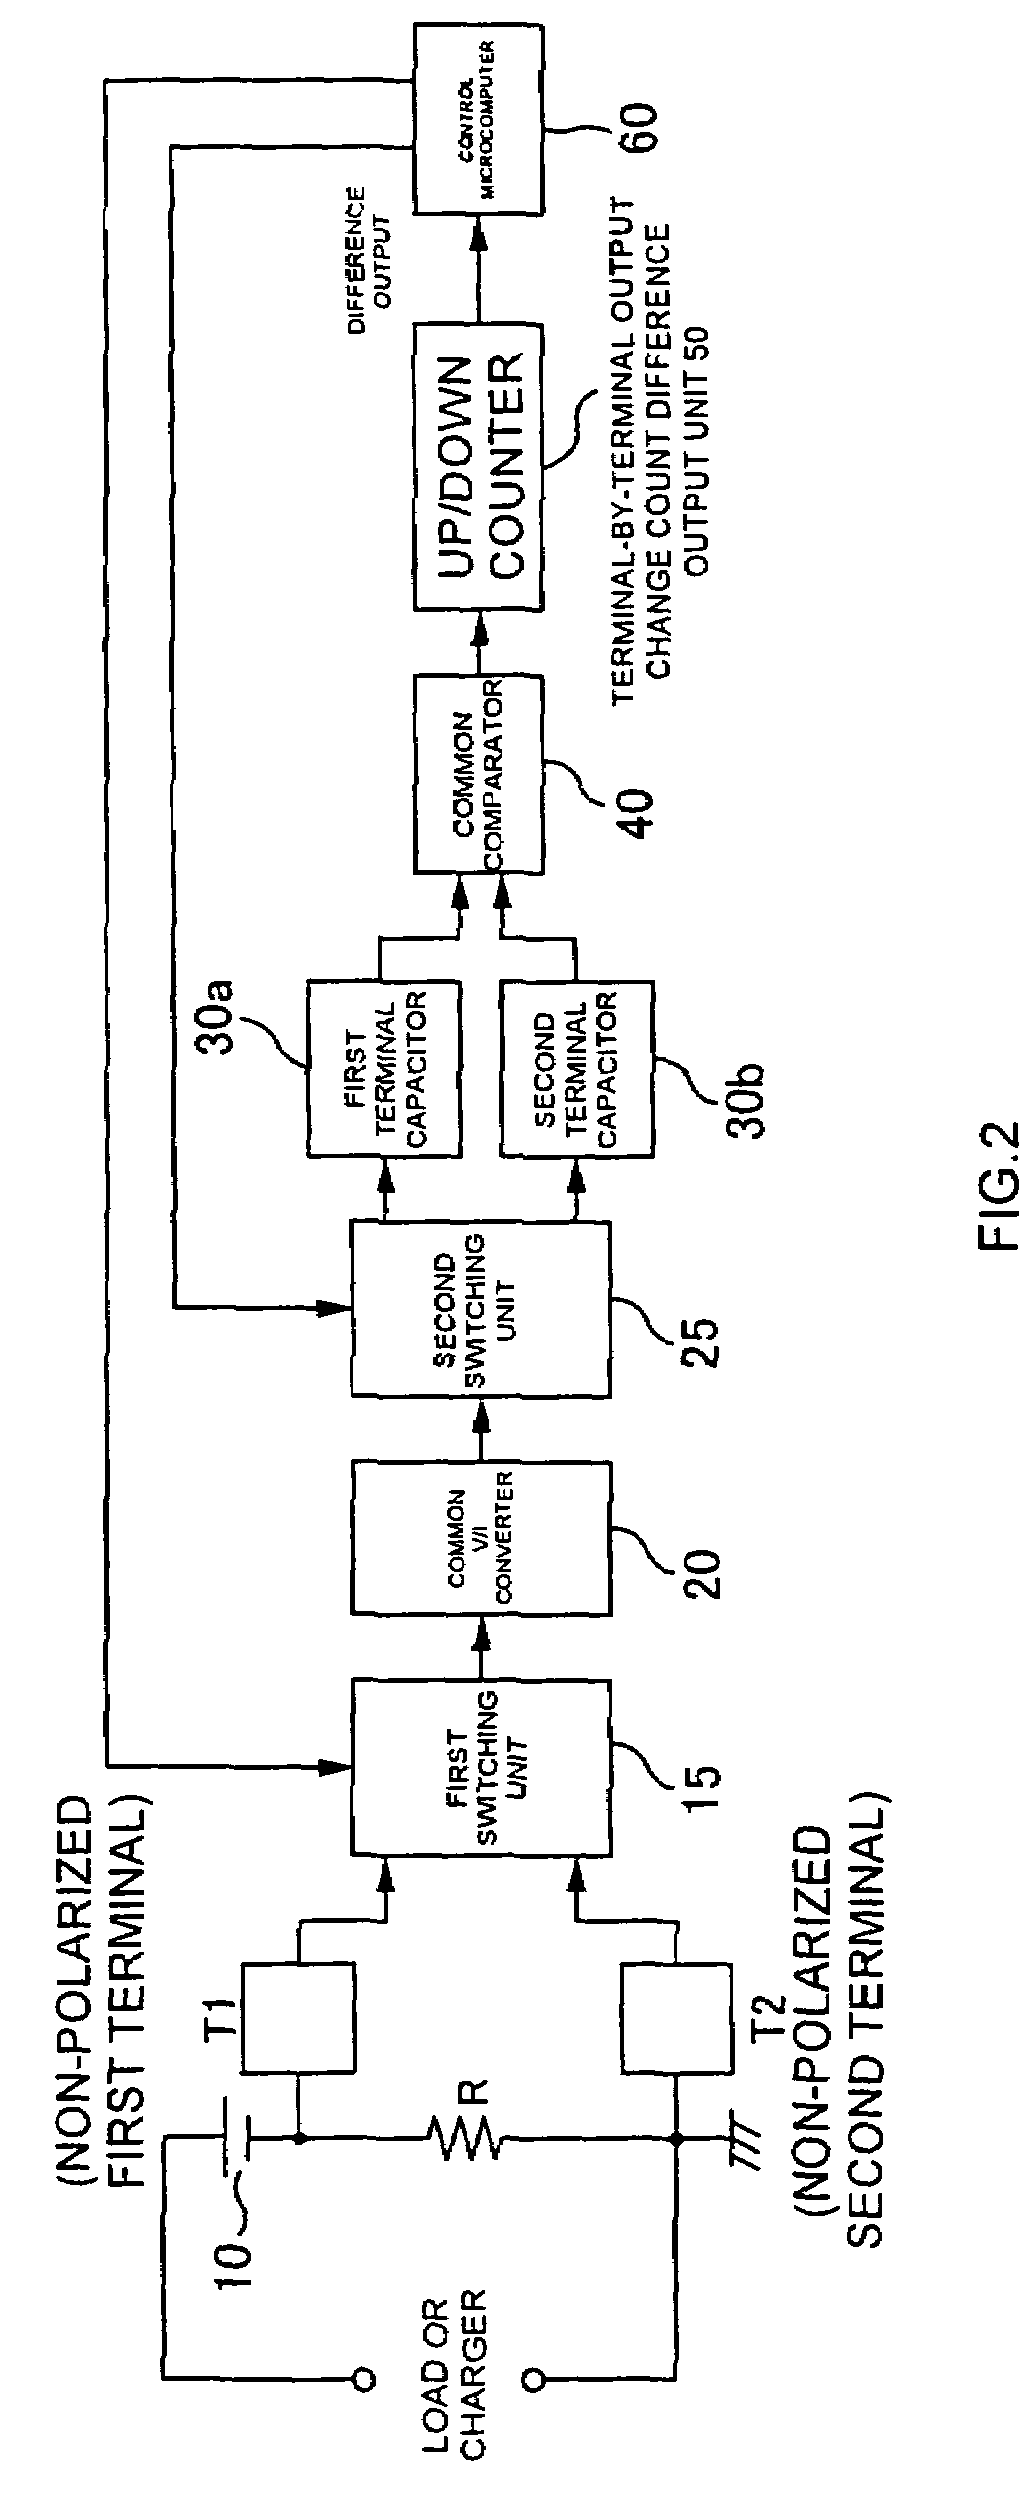 Battery charge/discharge monitoring circuit and method